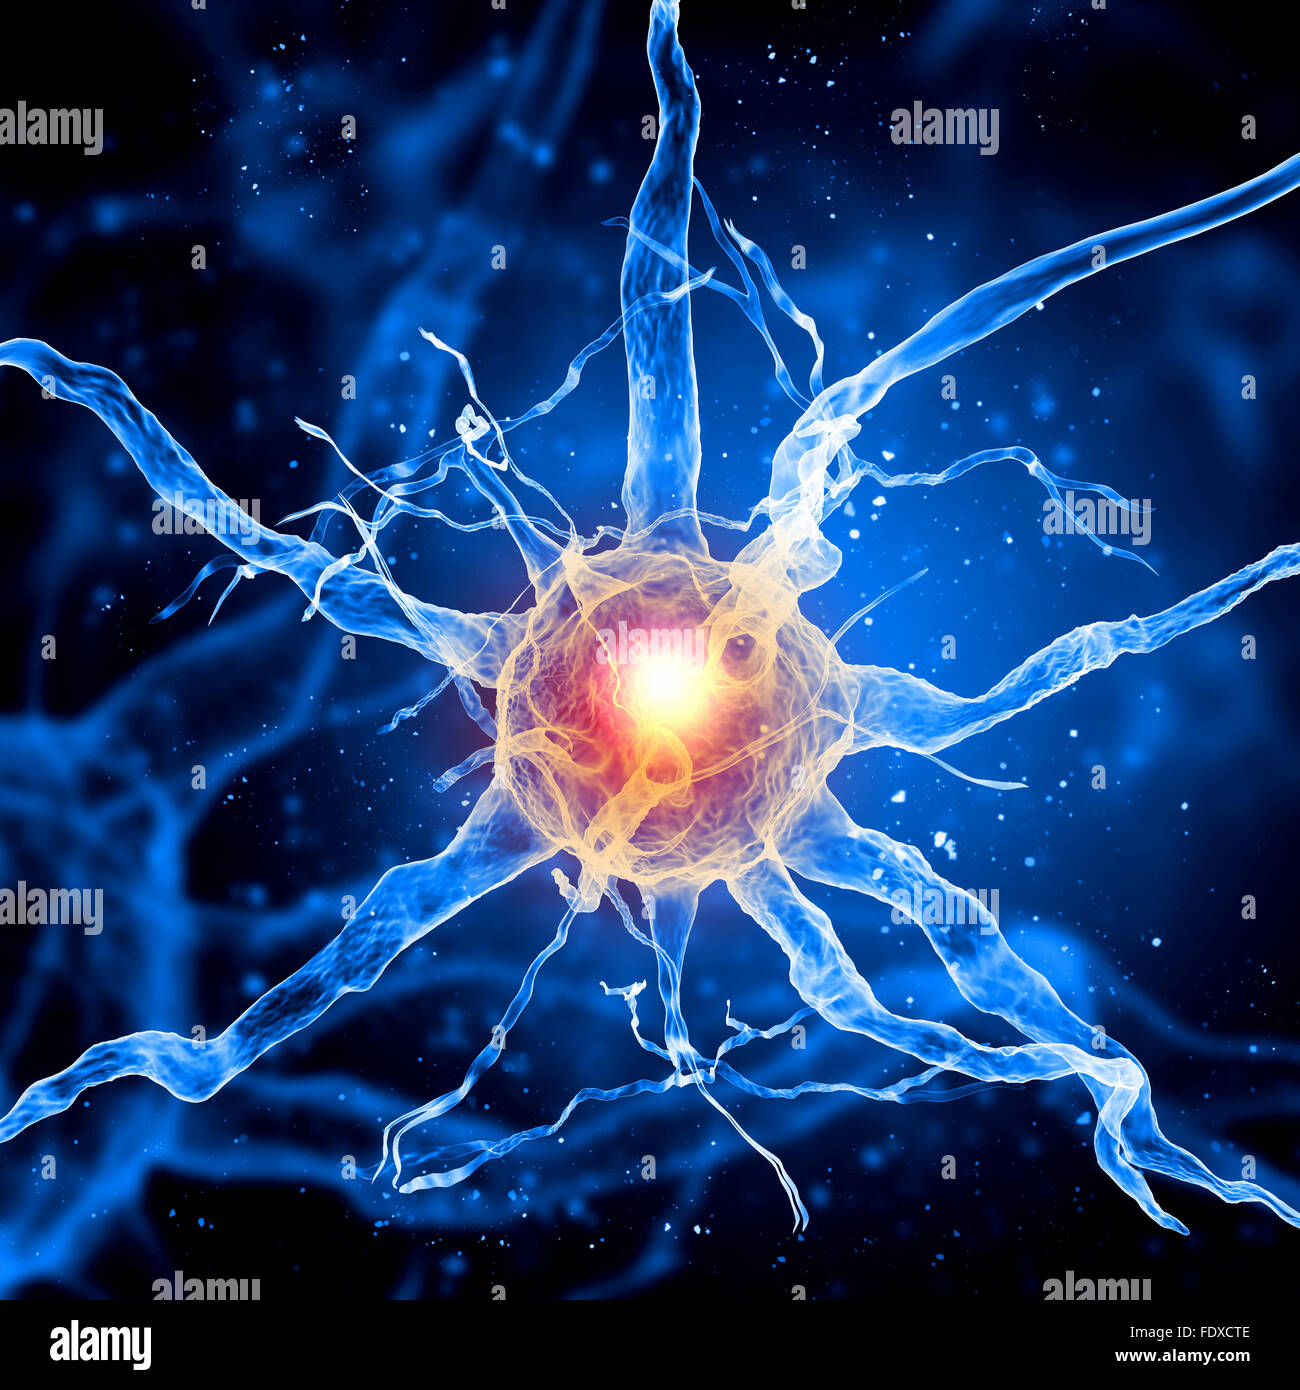 Illustration of a nerve cell on a colored background with light effects Stock Photo